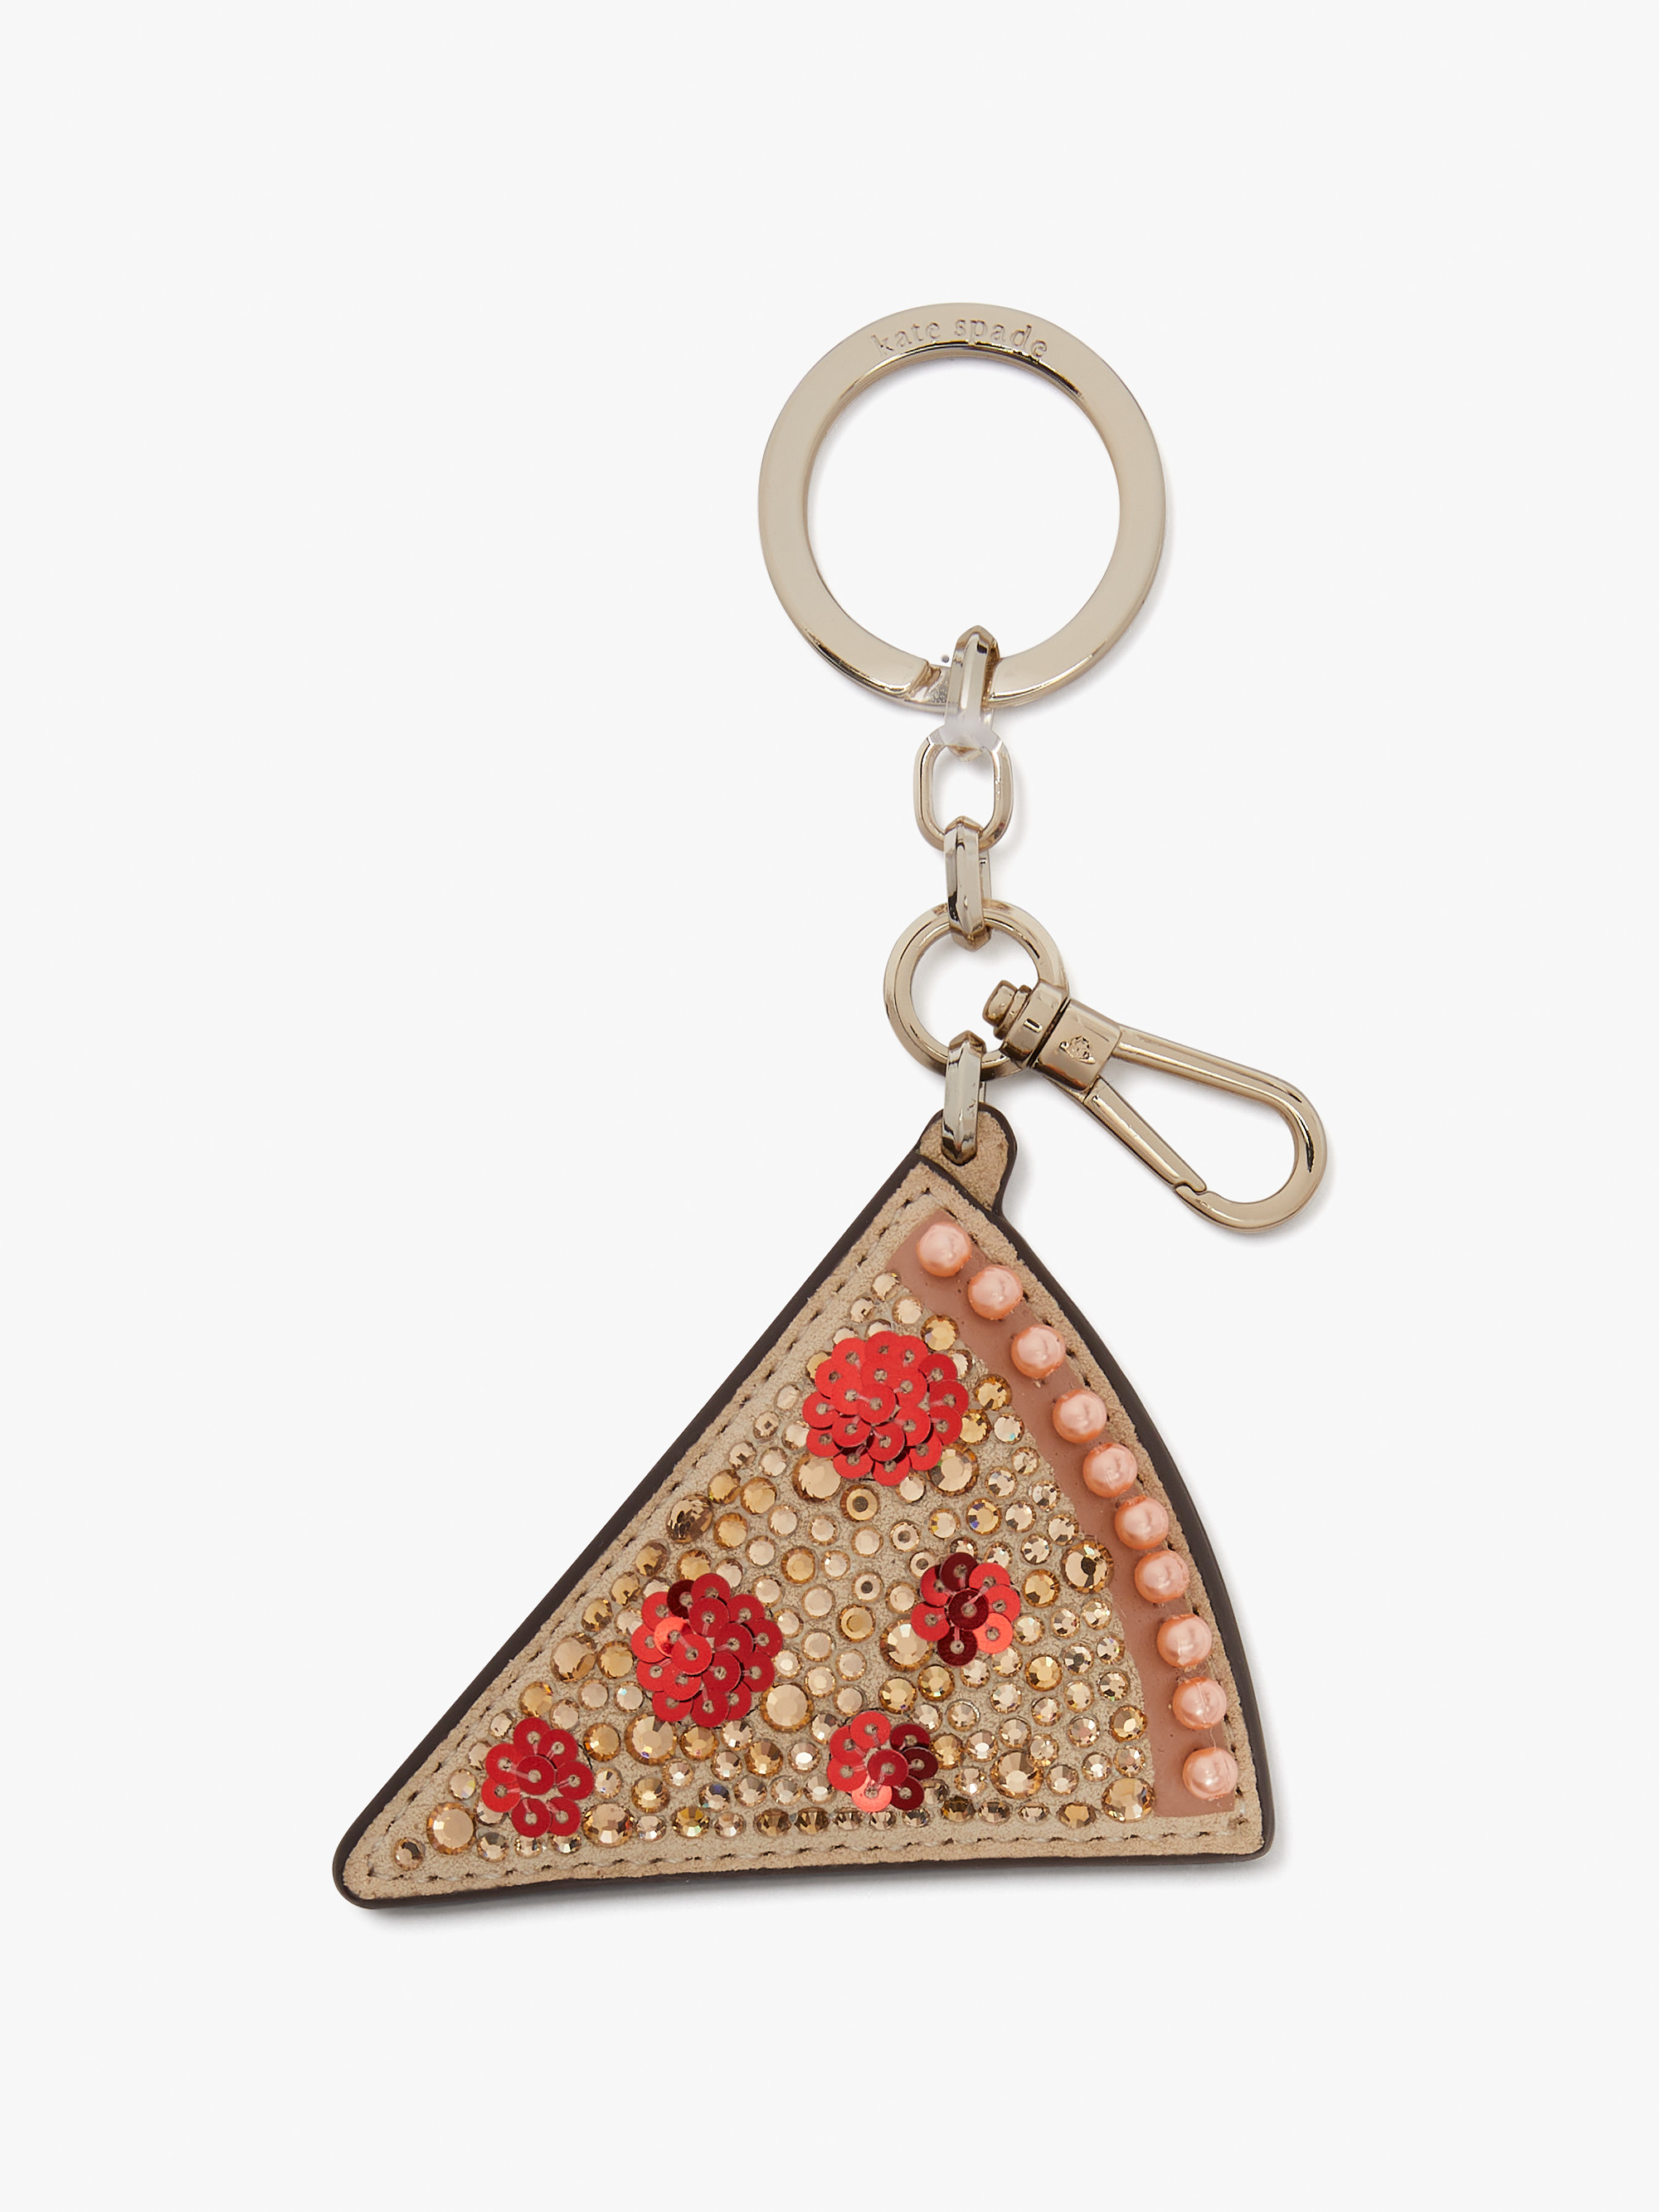 on a roll pizza bag charm